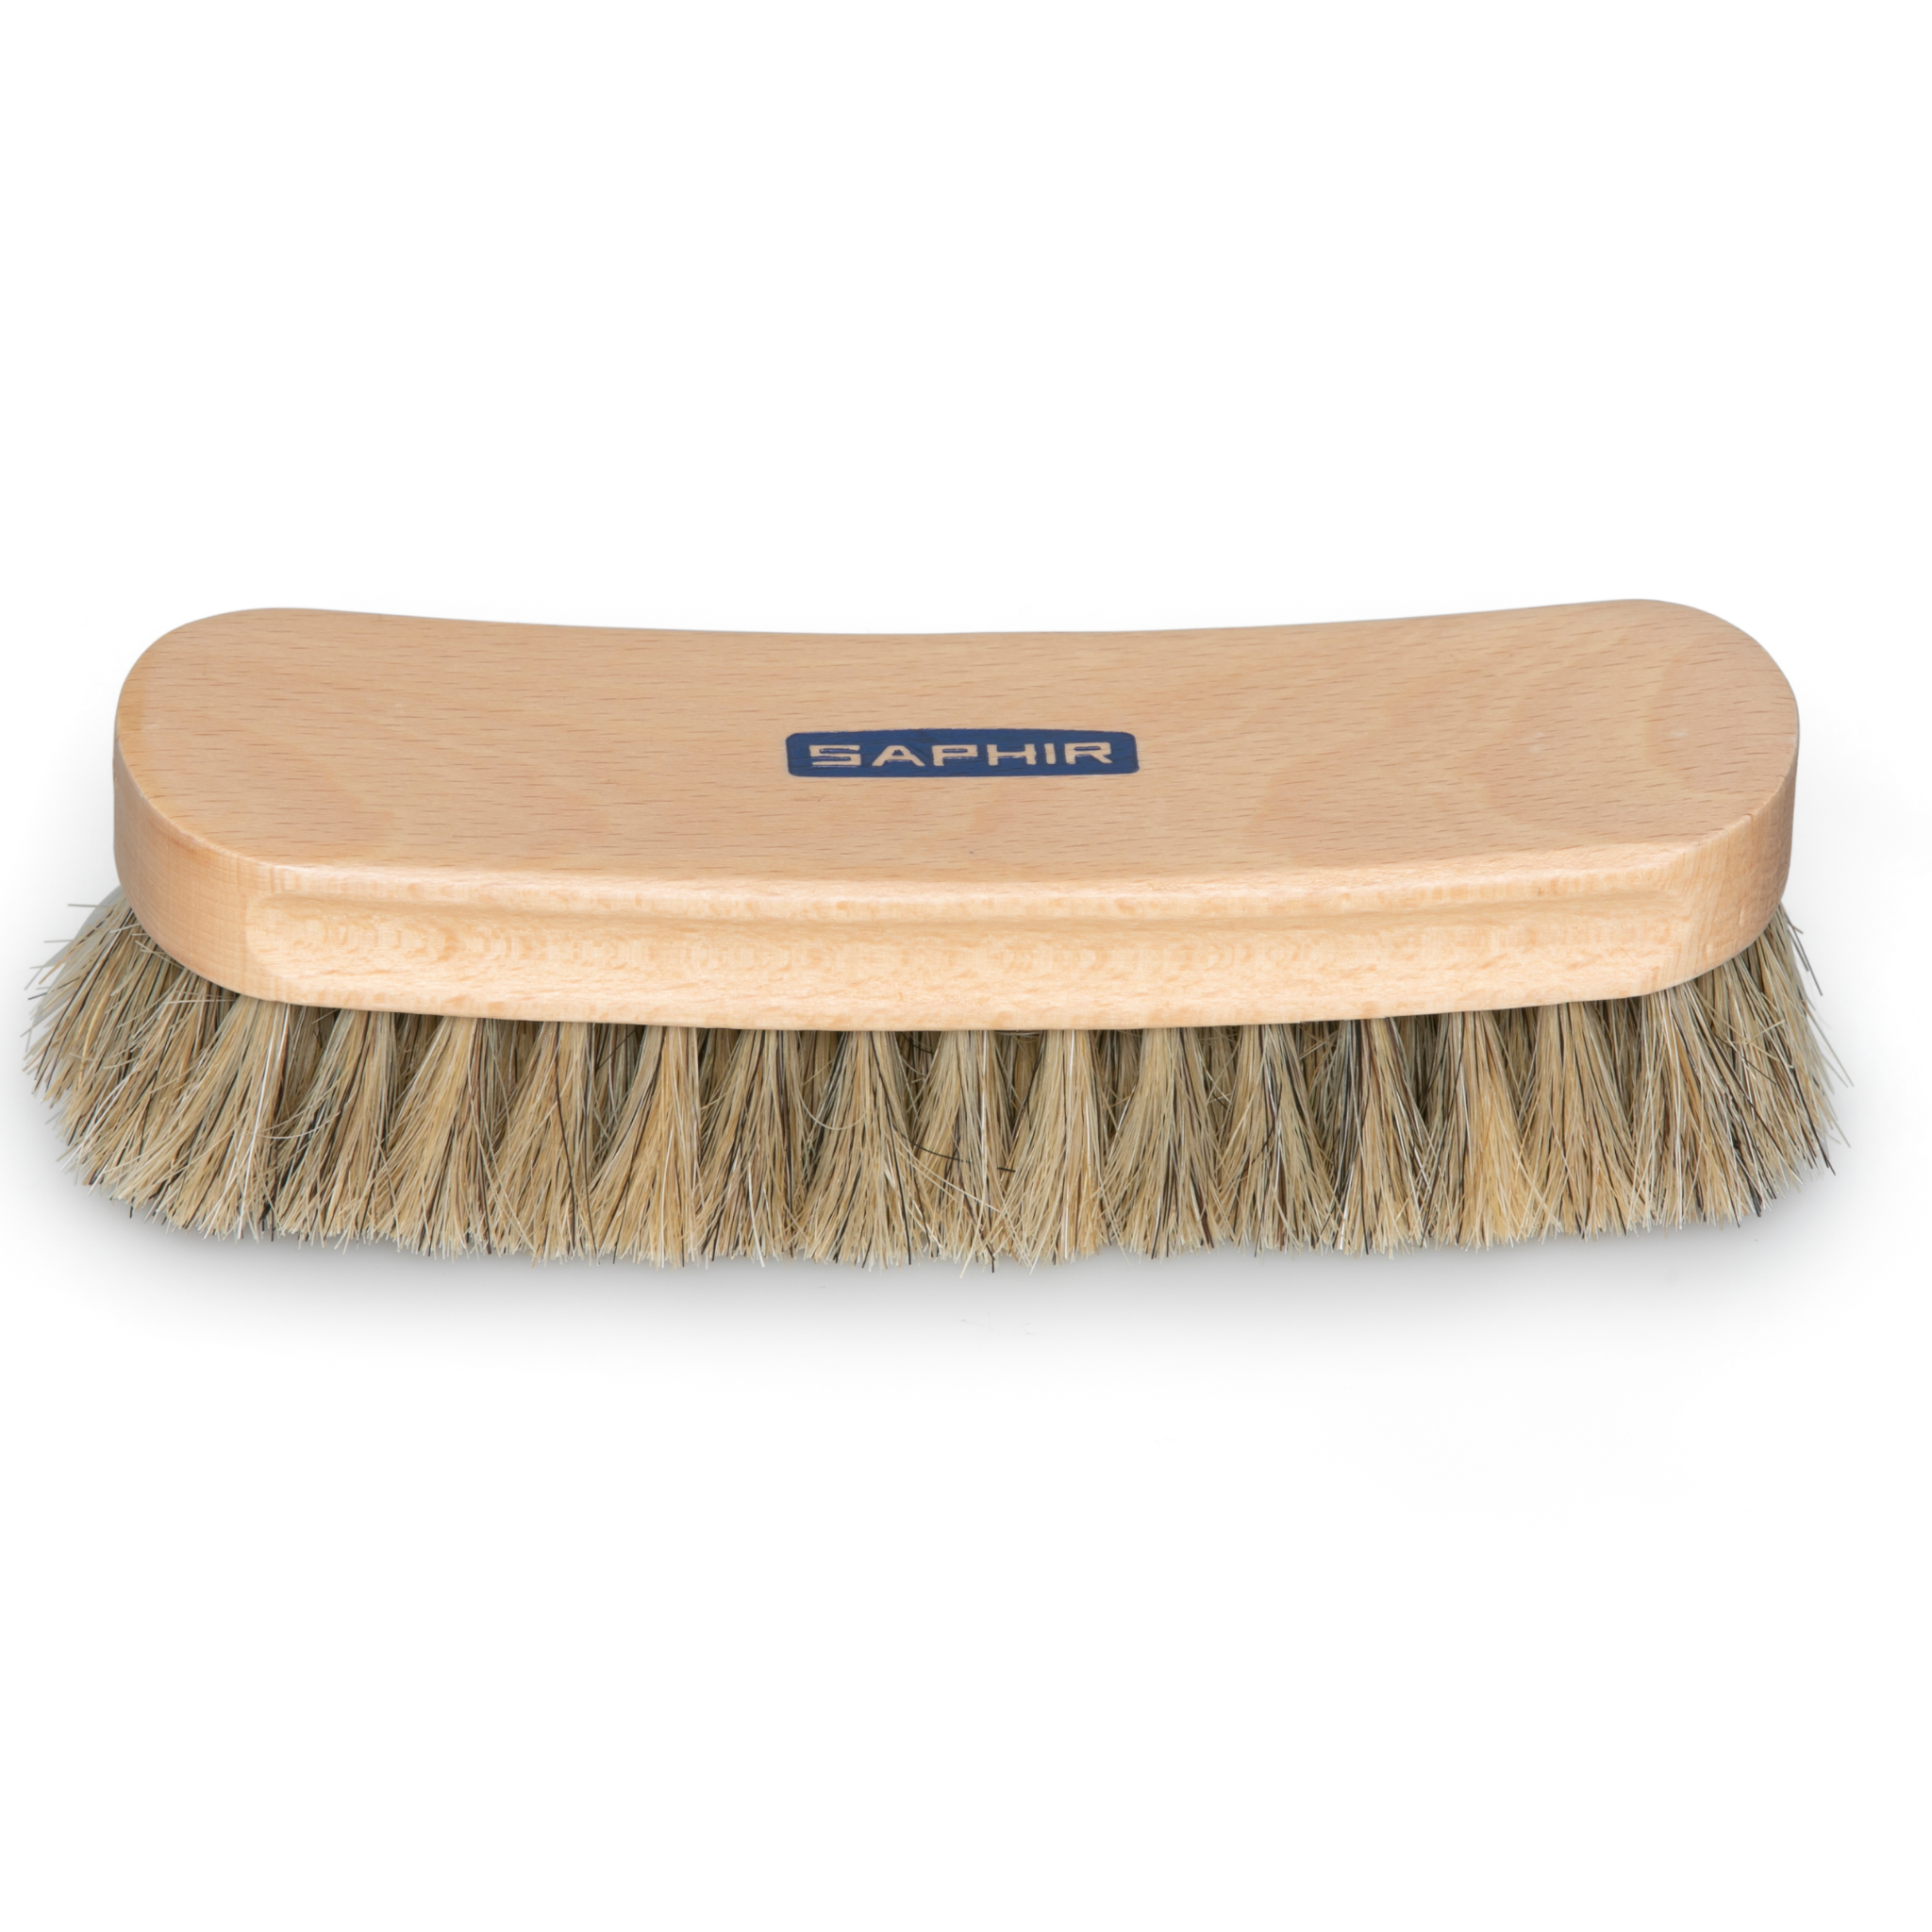 Saphir horse hair brush for leather shoe care. Stocked by Little Lusso Australia